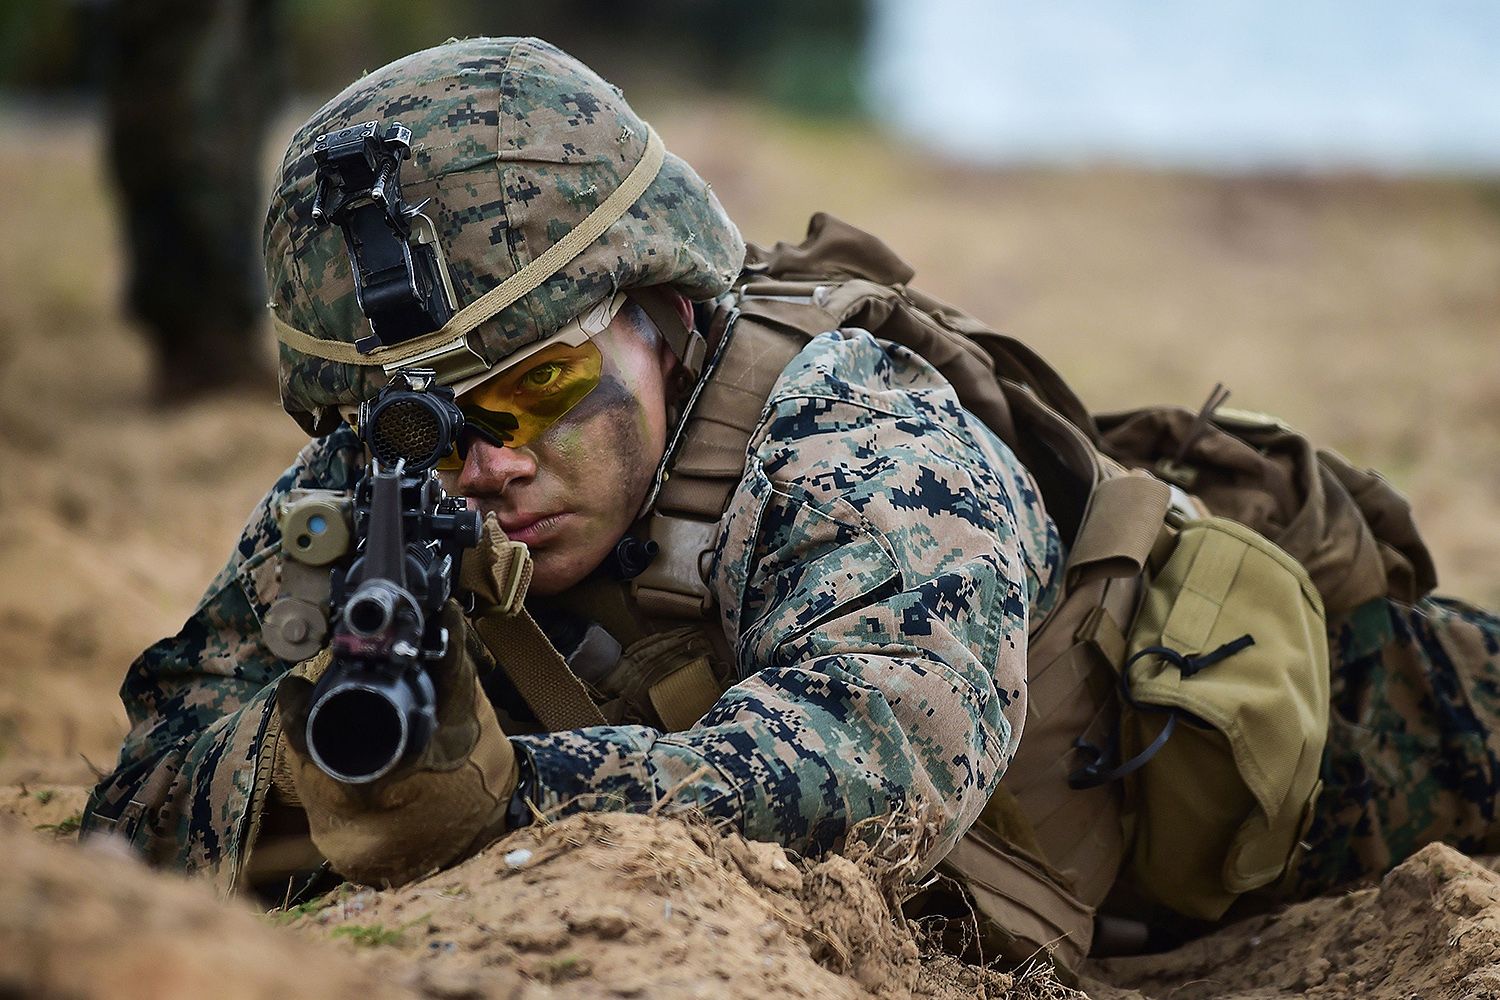 The Marine Corps's Massive Reforms to Fight China May Destroy Its Real Skills